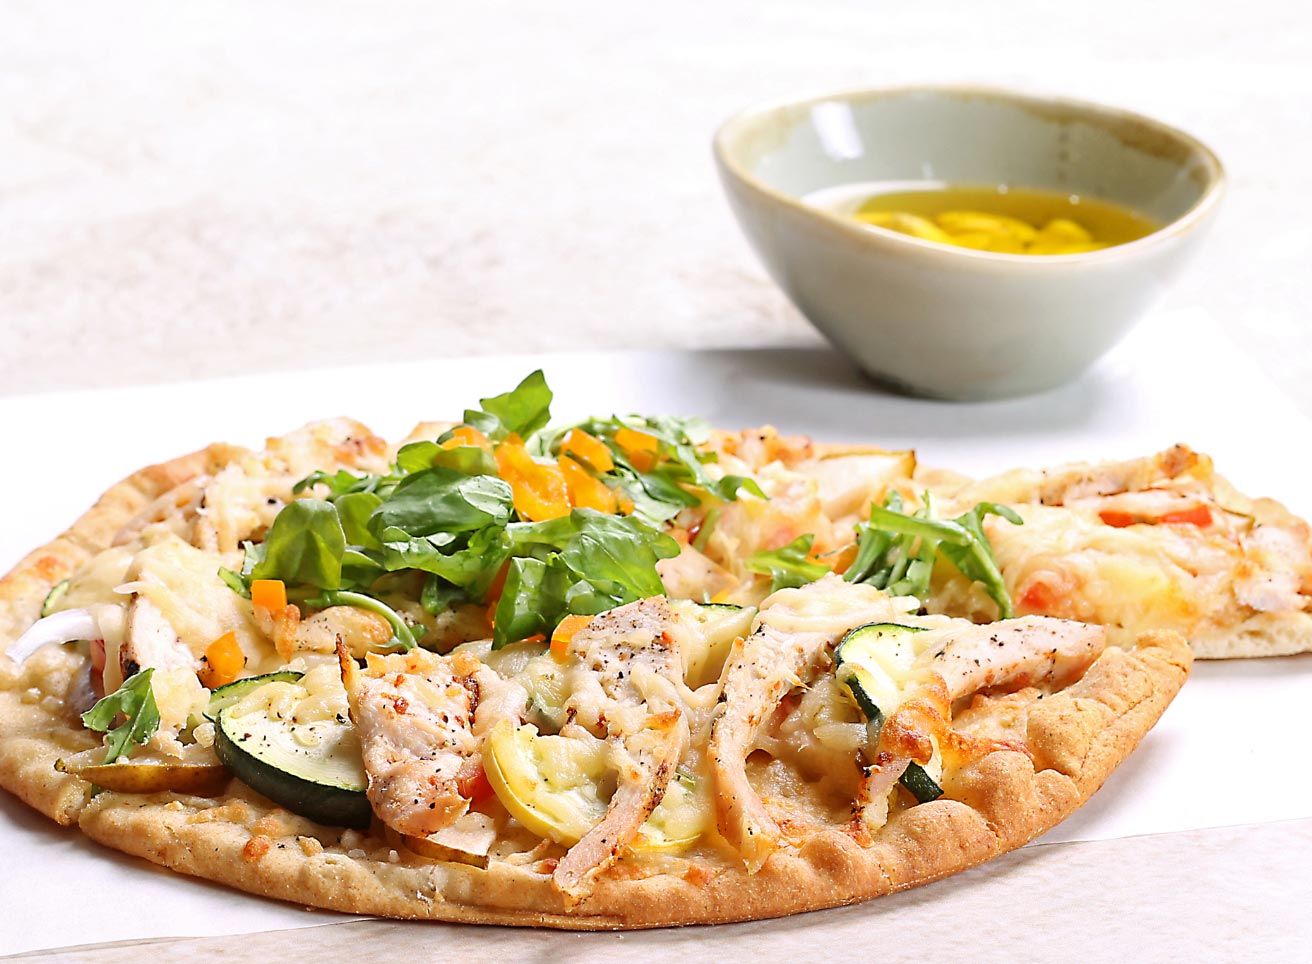 Grilled Chicken and Vegetables on a Flatbread